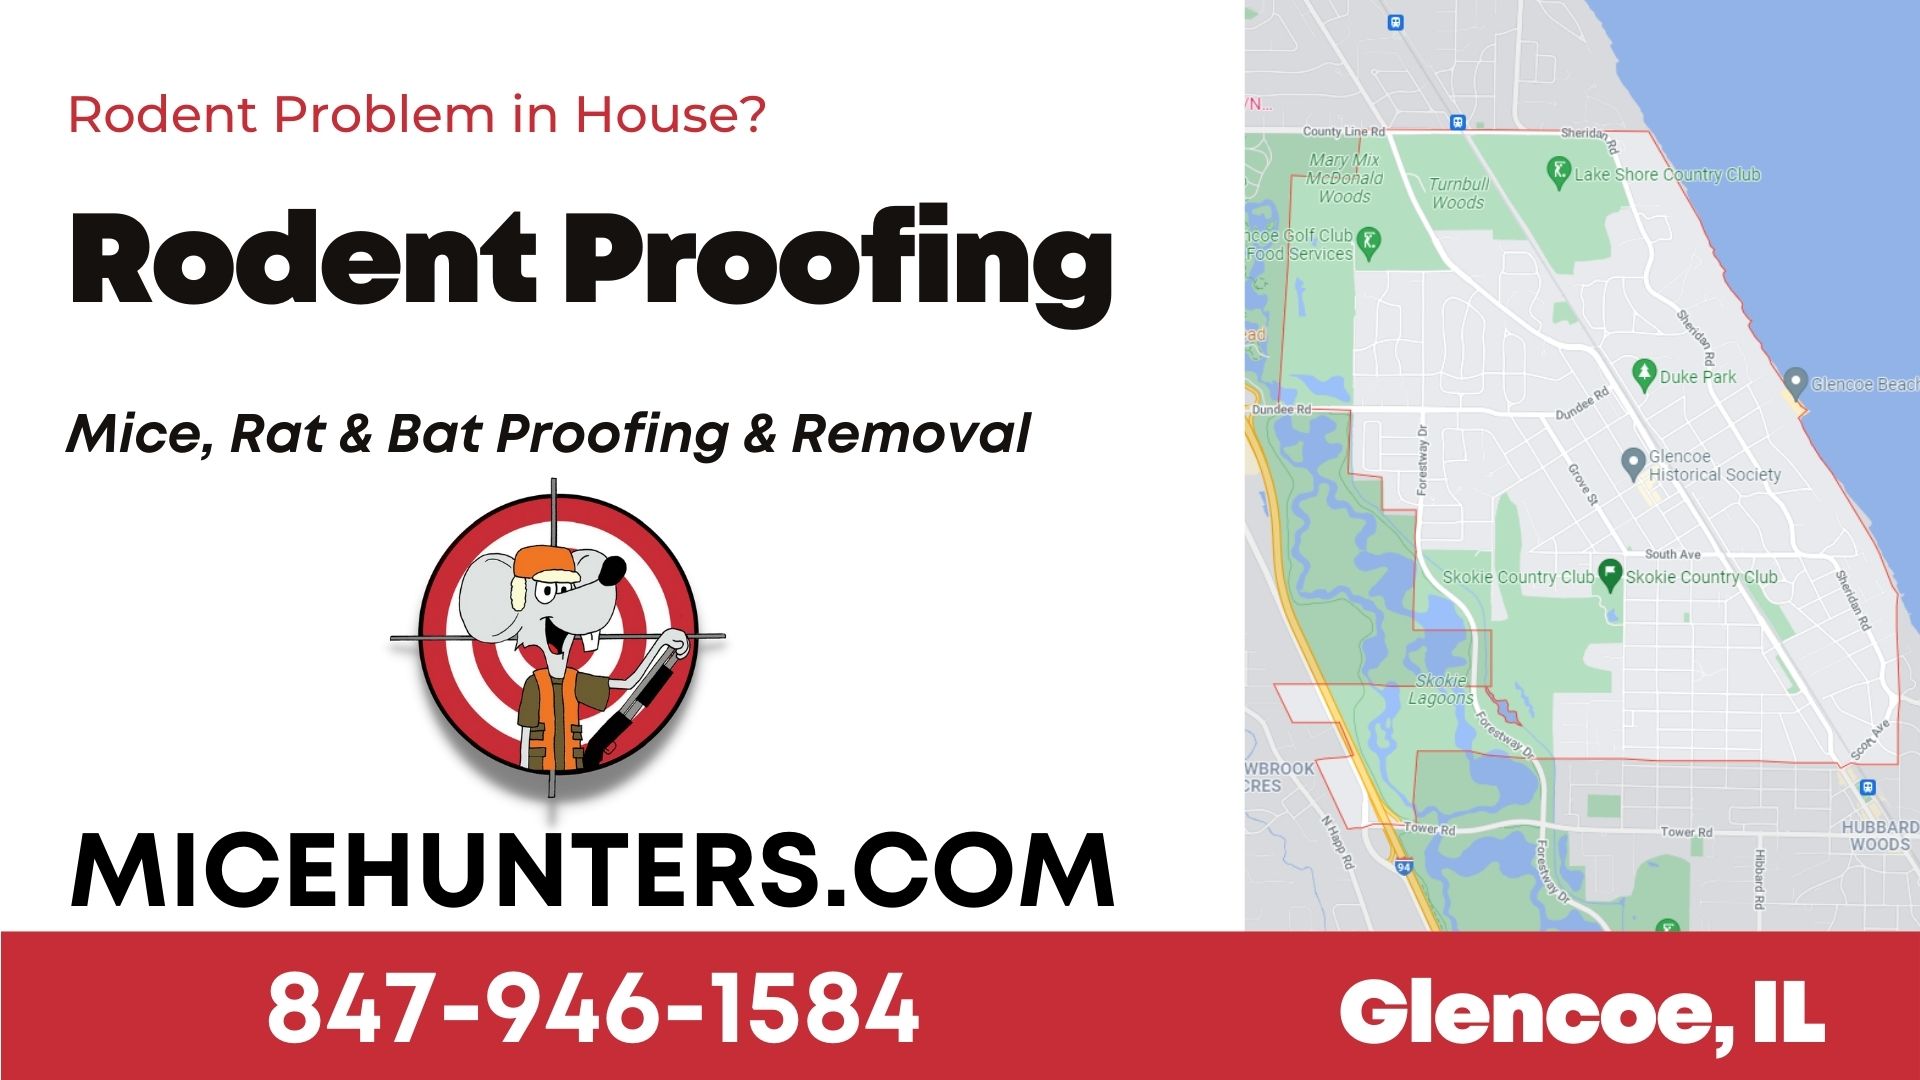 Glencoe Rodent and Mice Proofing Exterminator